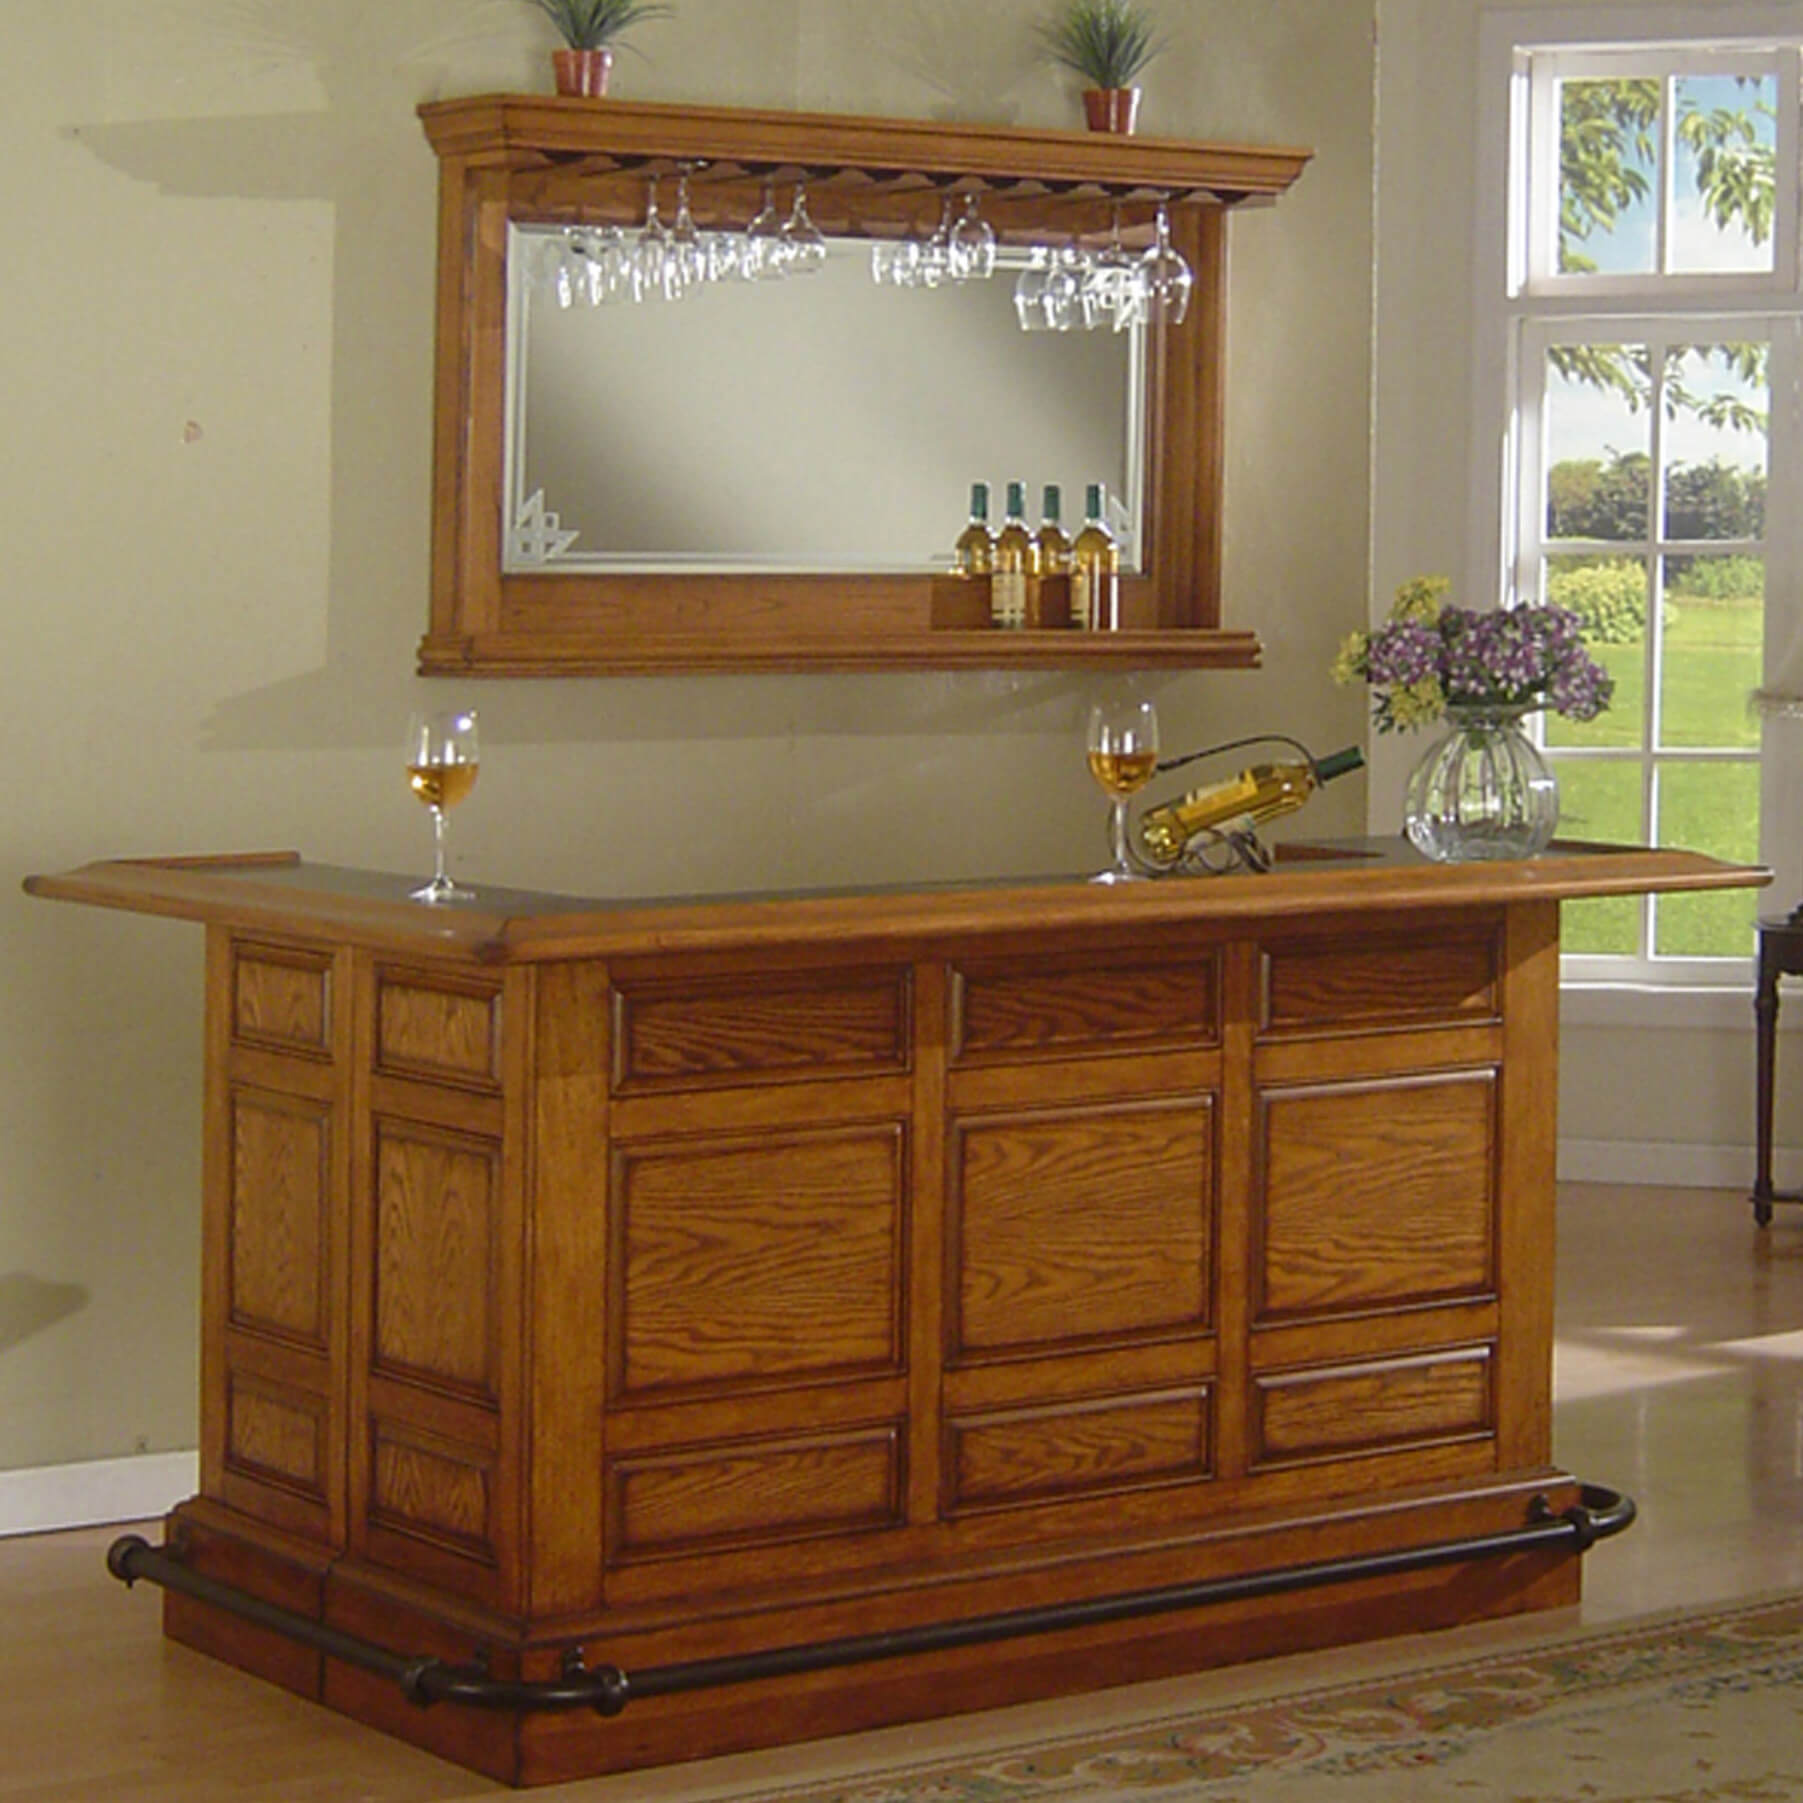 Solid wood home bar with wrap-around counter.